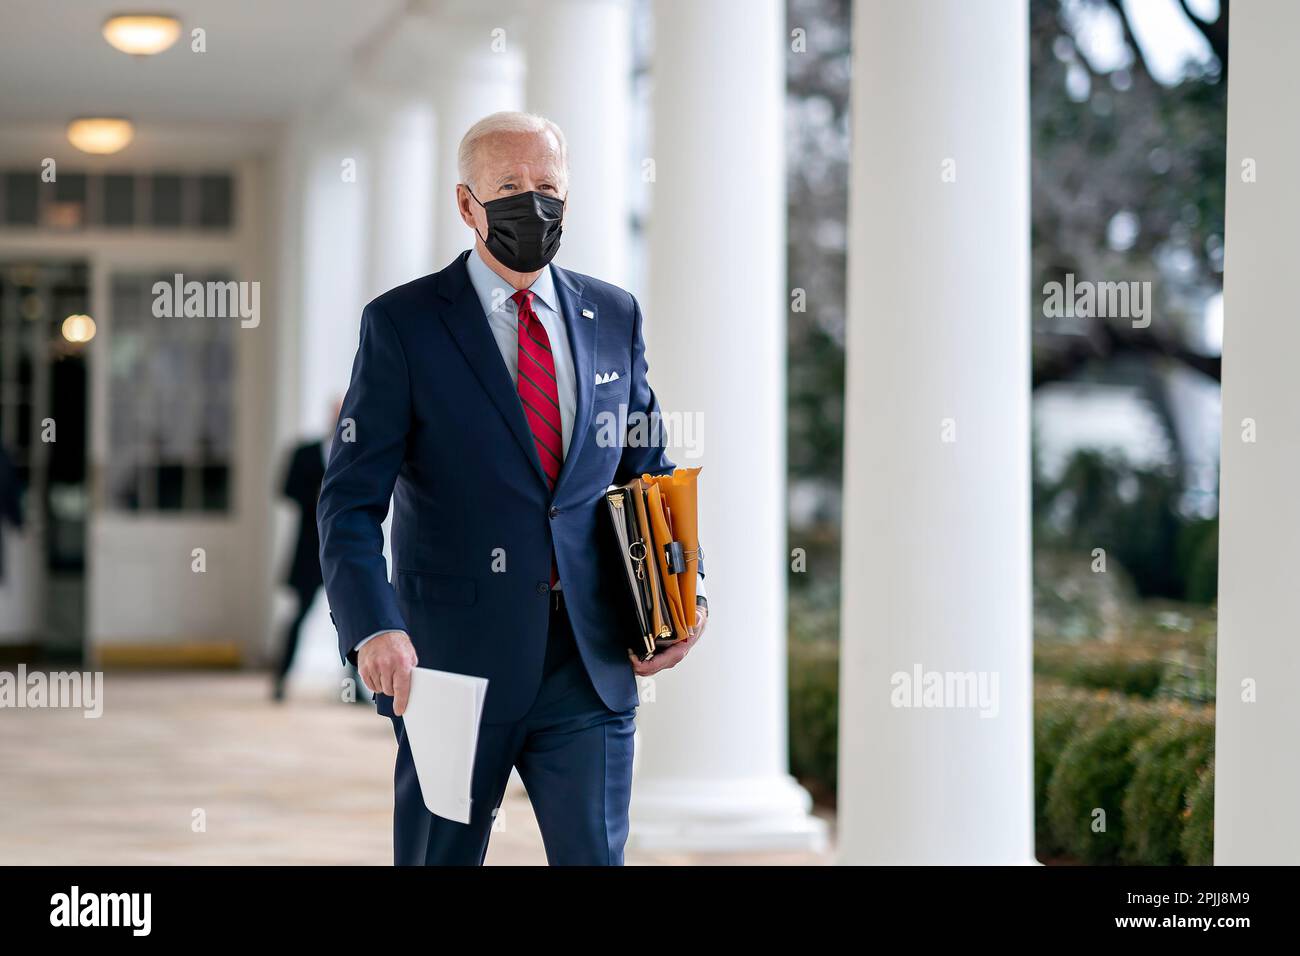 President Joe Biden walks along the Colonnade of the White House Thursday, Jan. 28, 2021, en route to the Oval Office. (Official White House Photo by Adam Schultz) Stock Photo